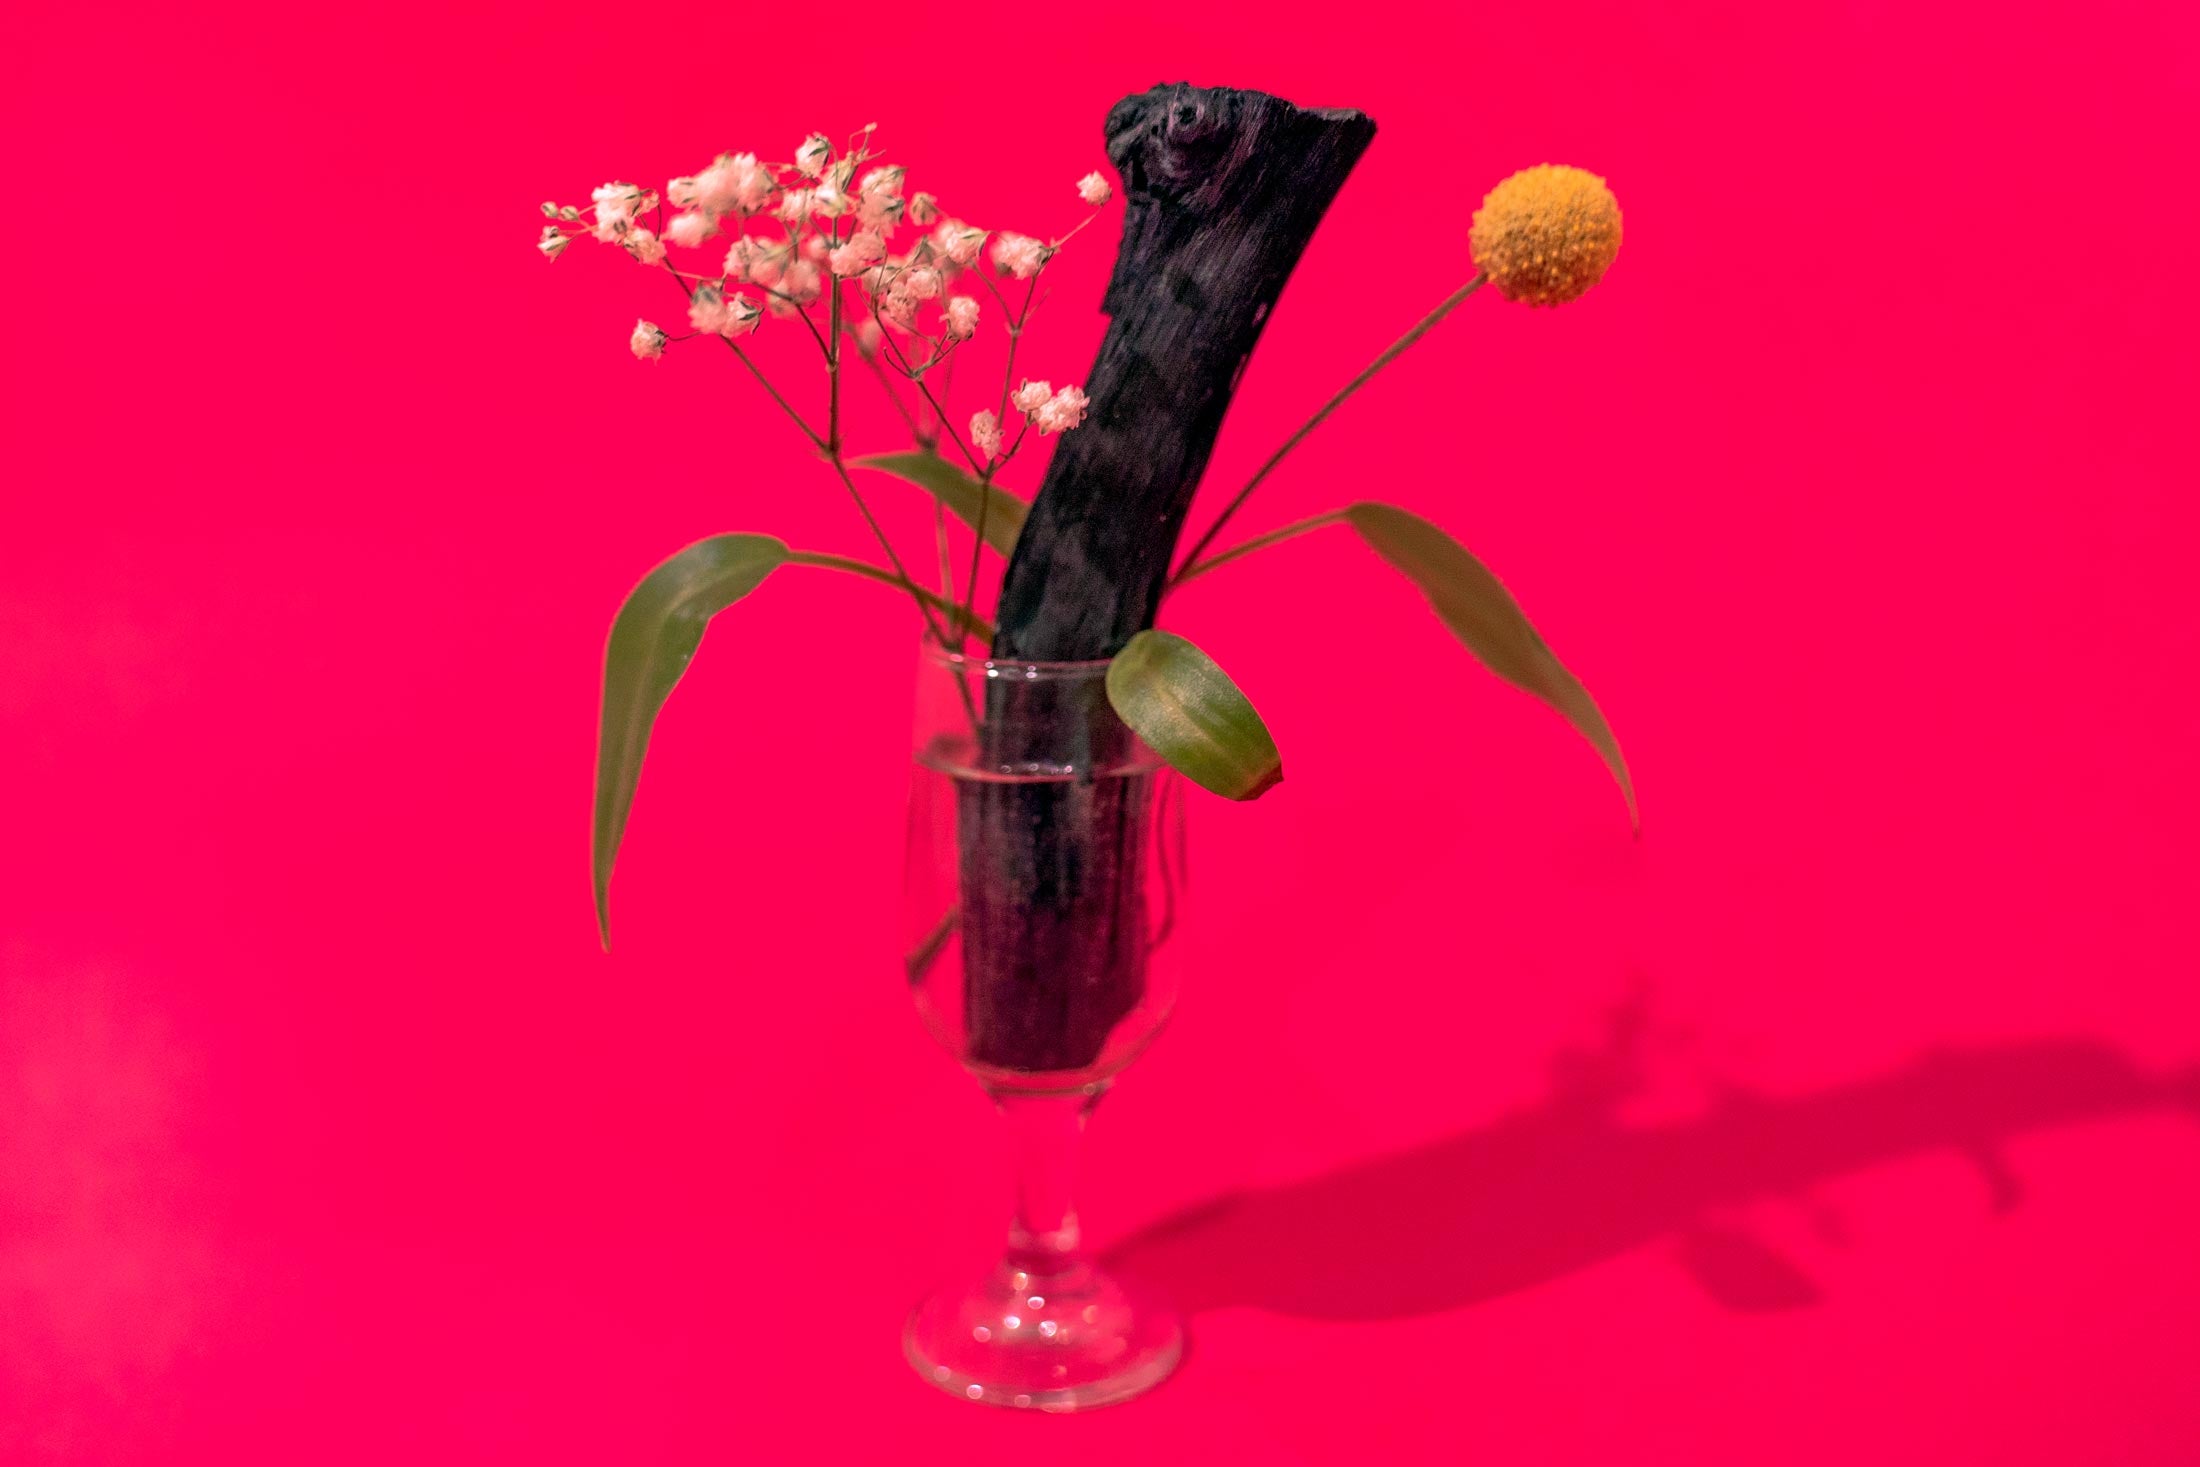 A delicate floral arrangement prominently featuring a charcoal stick.